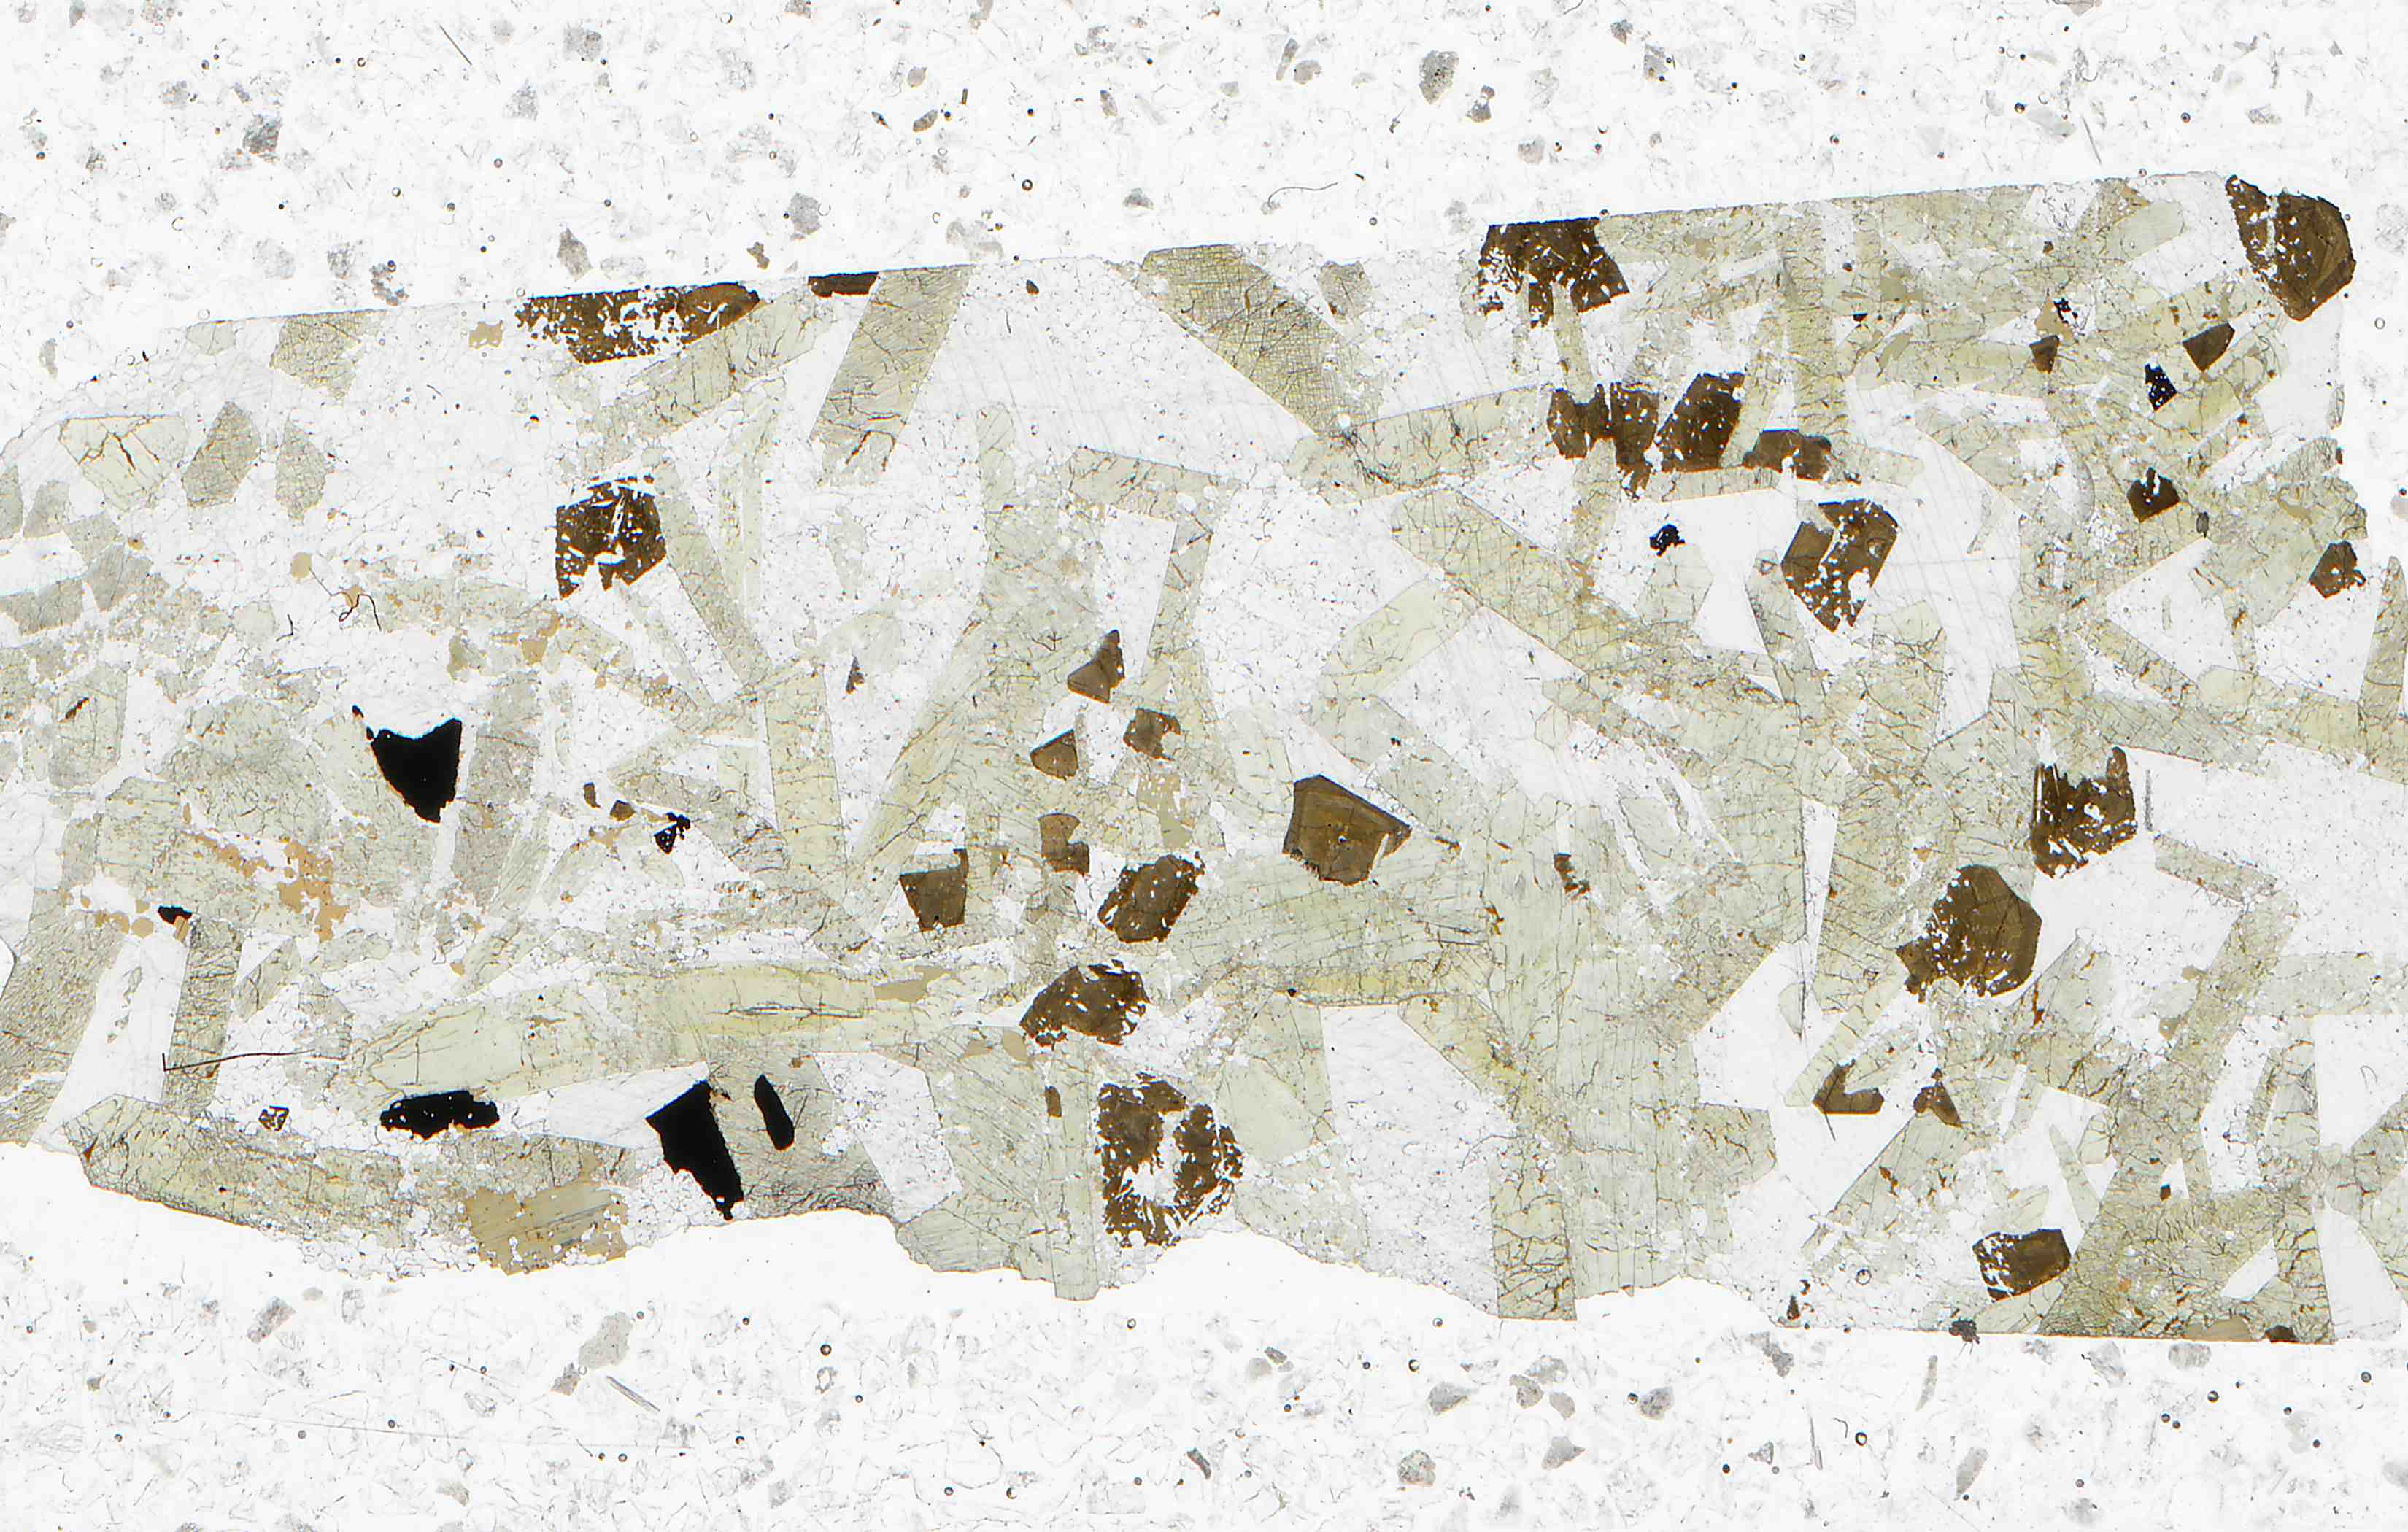 Oka Quebec pyrochlore bearing carbonatite in thin section